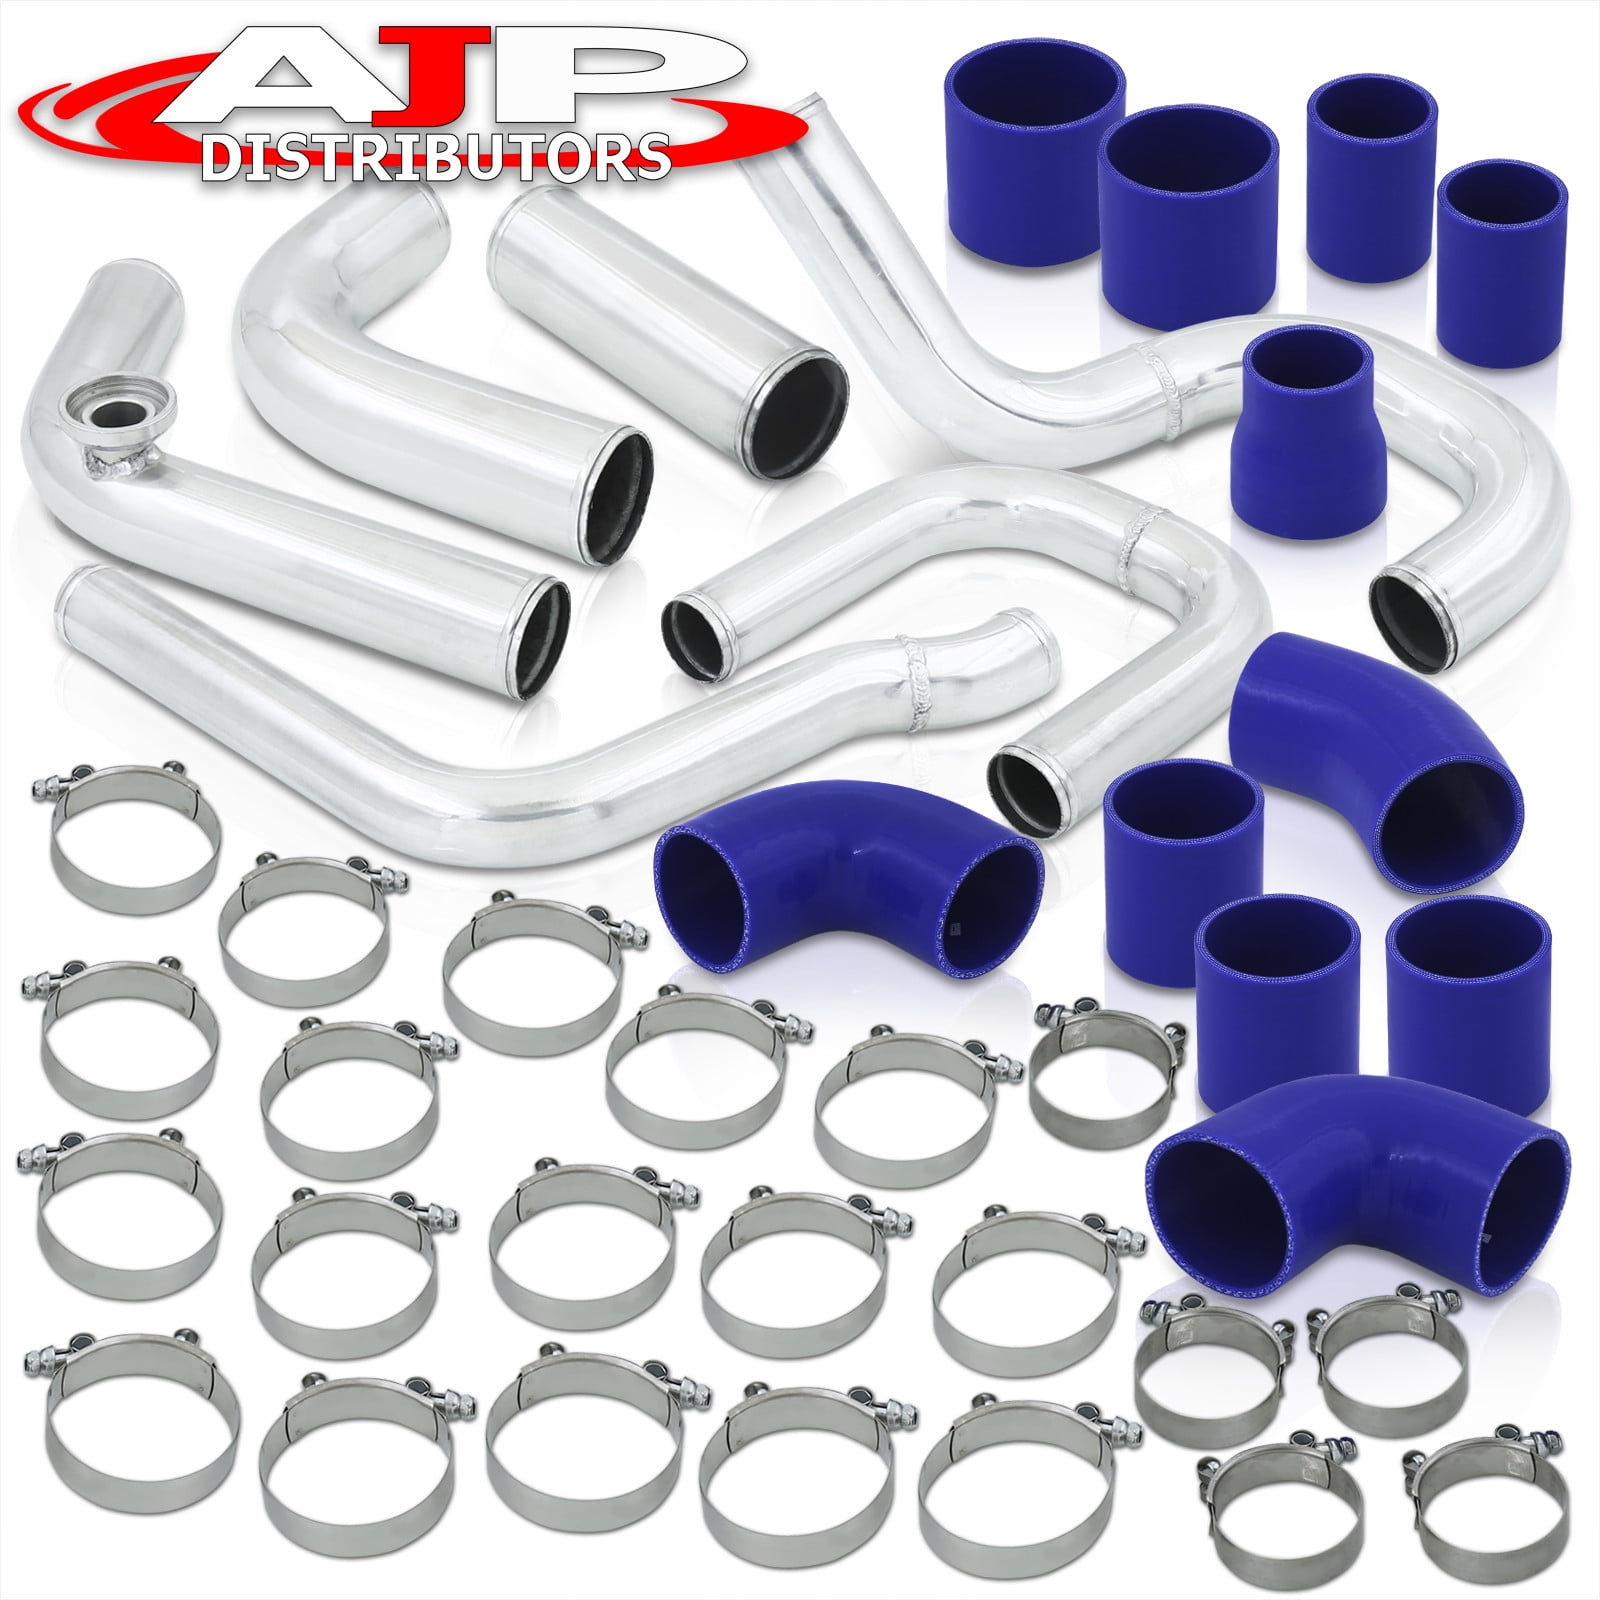 Silicone Blue Couplers Set For Mitsubishi Eclipse 2G RS GS 2.0L 420A 1995 1996 1997 1998 1999 95 96 97 98 99 AJP Distributors Upgrade Performance Racing JDM Turbo Intercooler Piping Kit